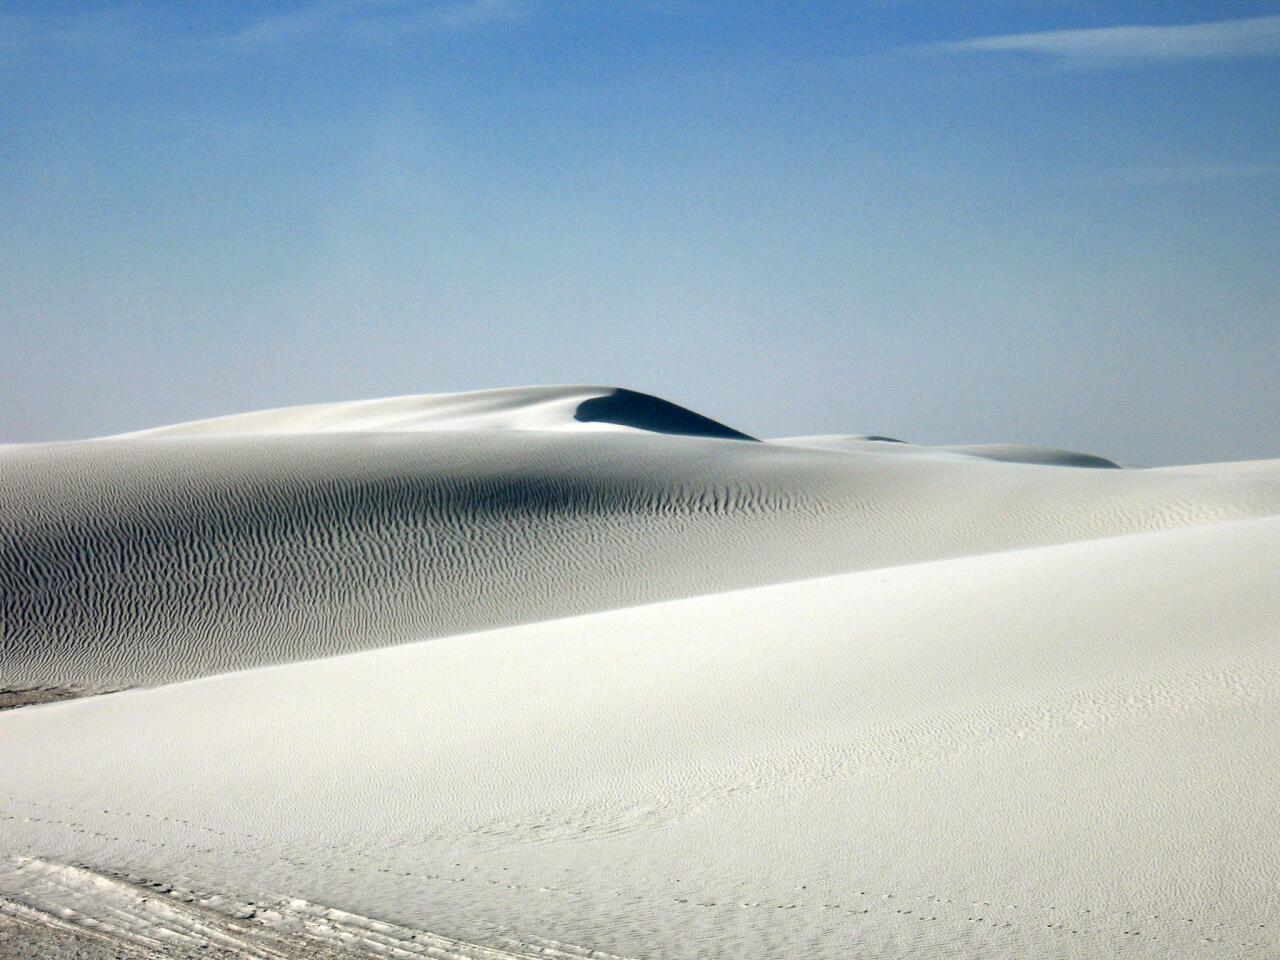 White Sands National Monument is the largest pure gypsum dune field in the world. The national monument offers visitors a drive through the fields, as well as an explanation of how all that sand got there.